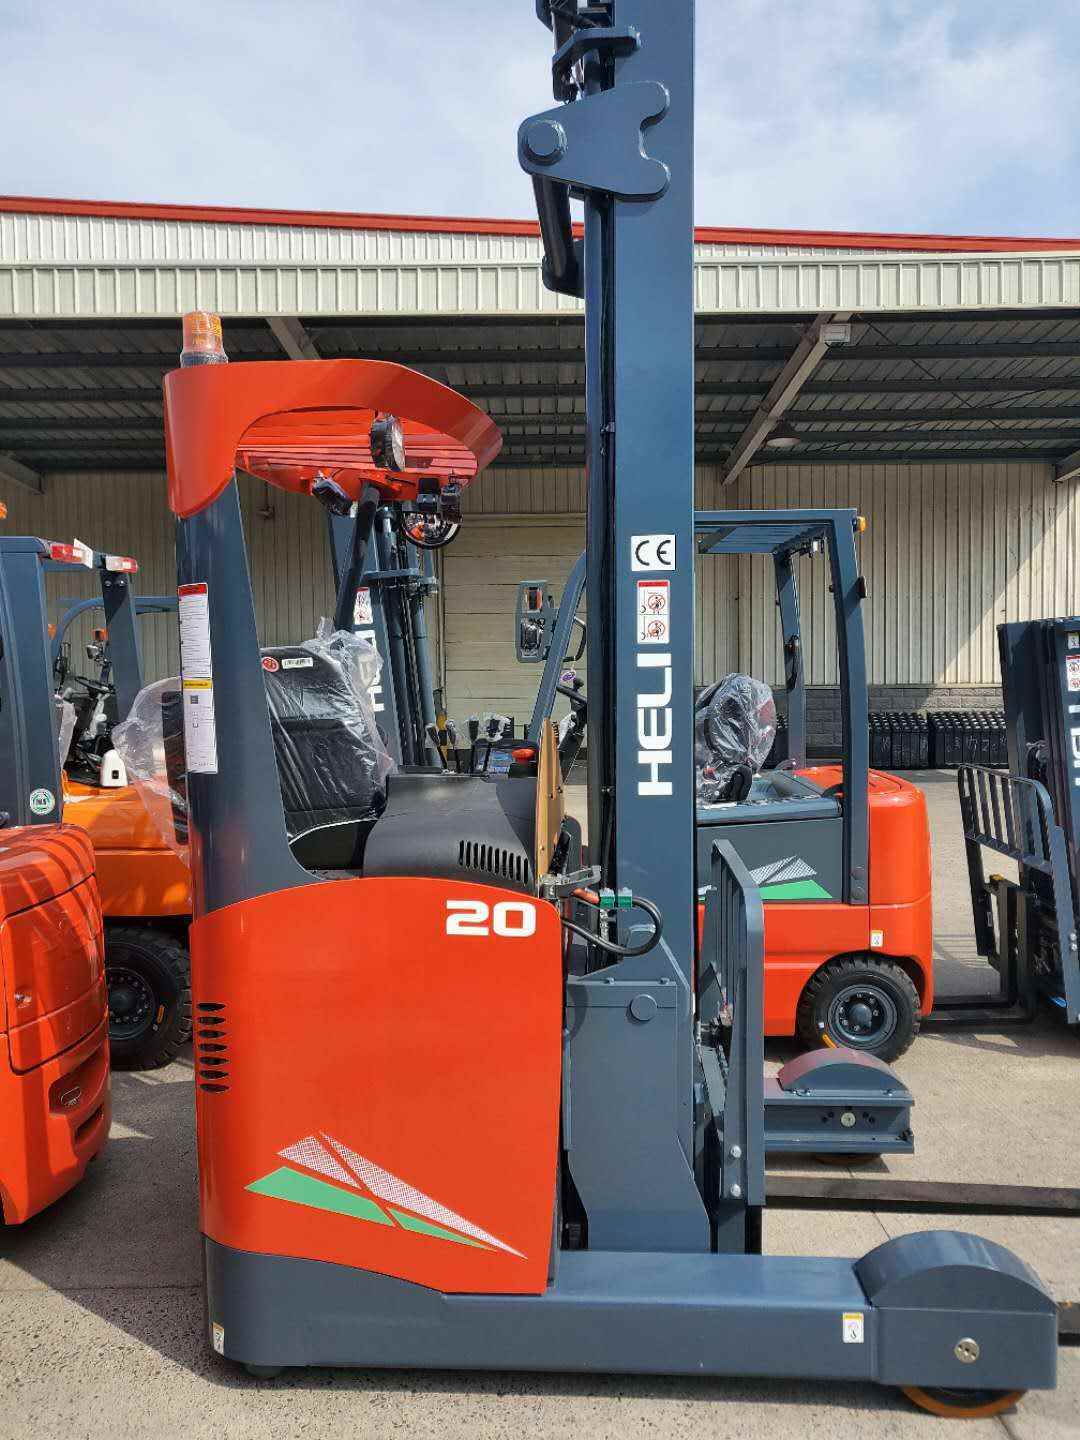 Heli G2 Series 2t Electric Reach Truck Forklift Cqd20